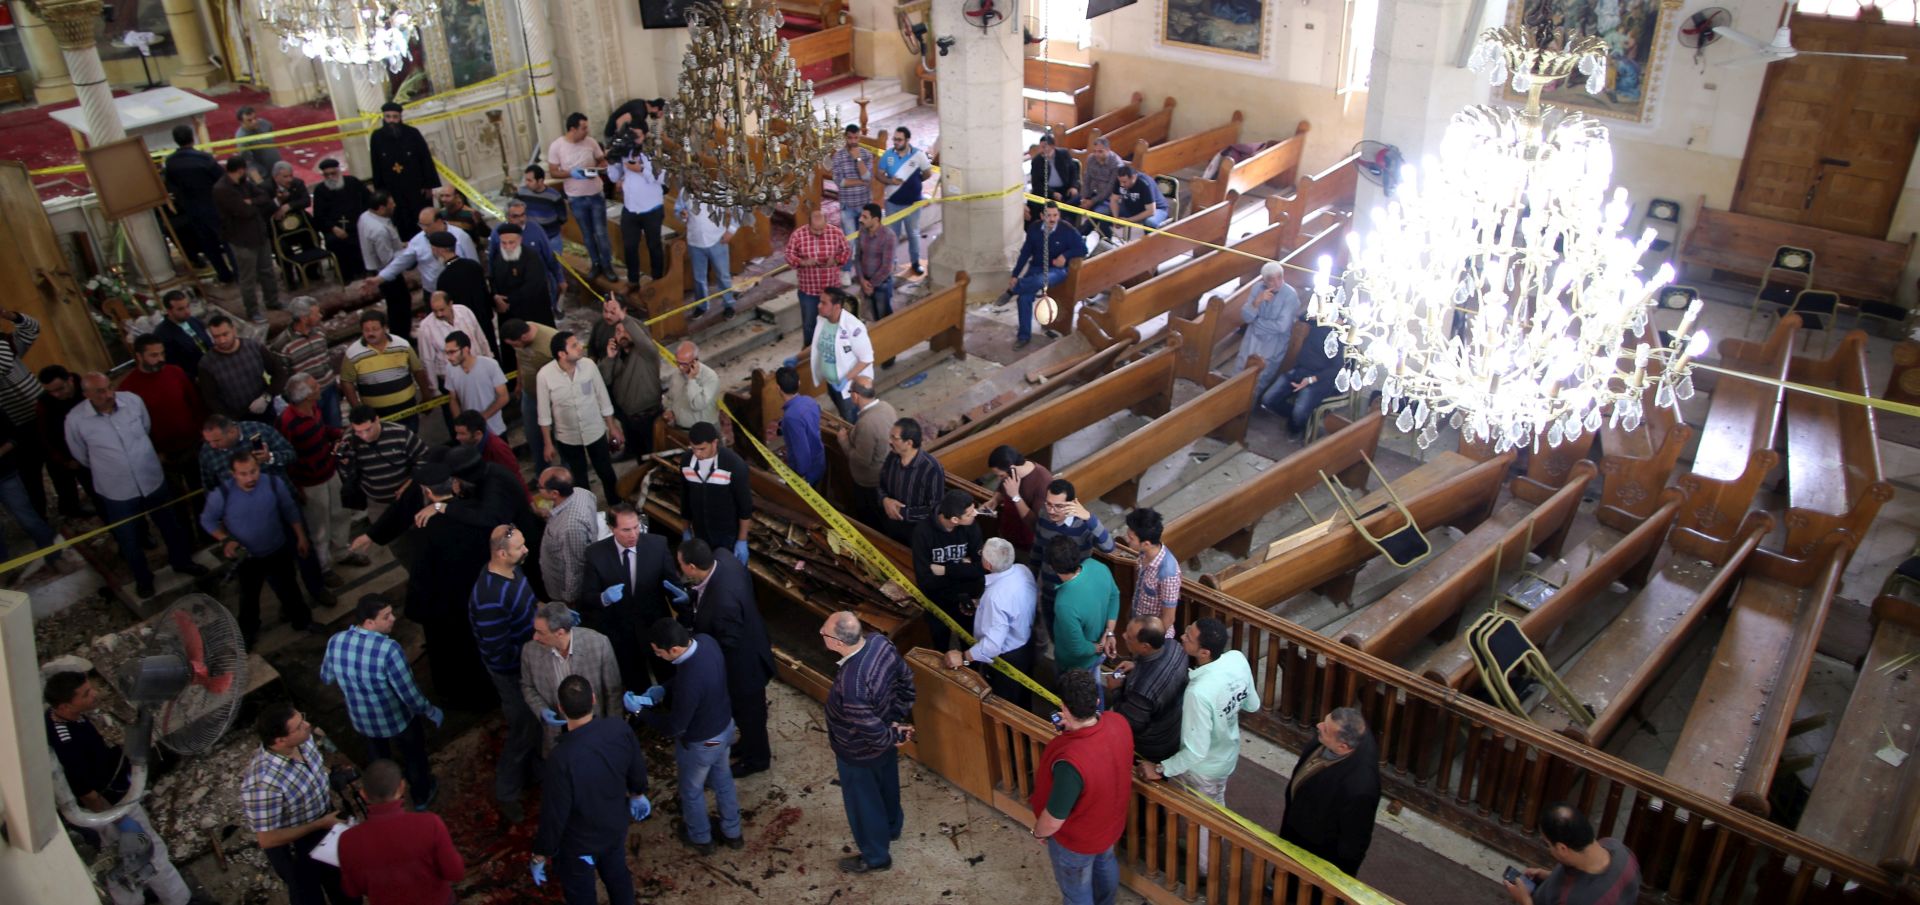 epa05898852 Security personnel investigate the scene of a bomb explosion inside Mar Girgis church in Tanta, 90km north of Cairo, Egypt, 09 April 2017. According to the Egyptian Health Ministry, at least 21 were killed and 69 injured in a bomb explosion at Mar Girgis Coptic church in the central delta city of Tanta during the Palm Sunday mass.  EPA/KHALED ELFIQI